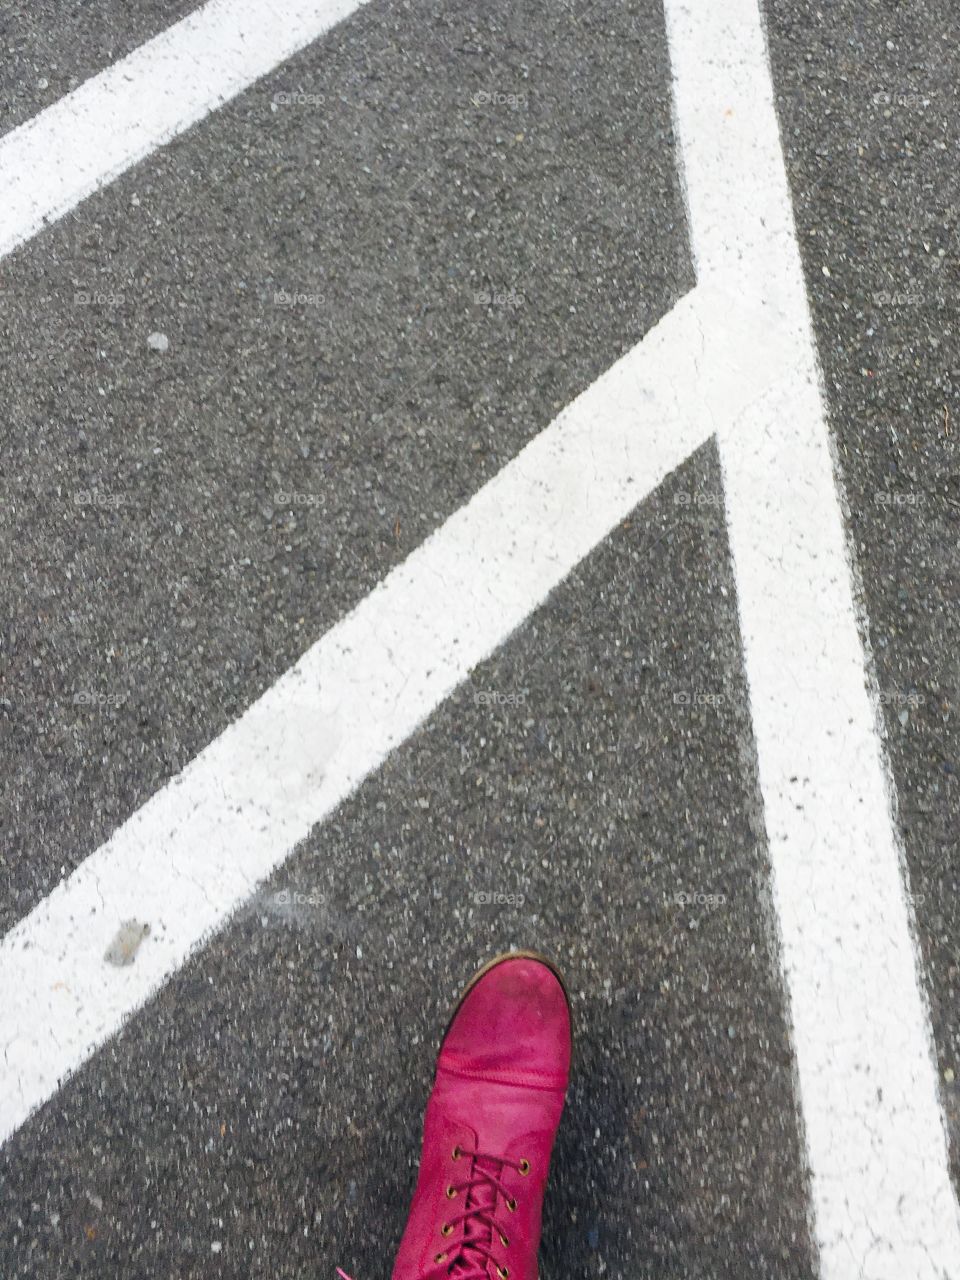 Shoes on pavement